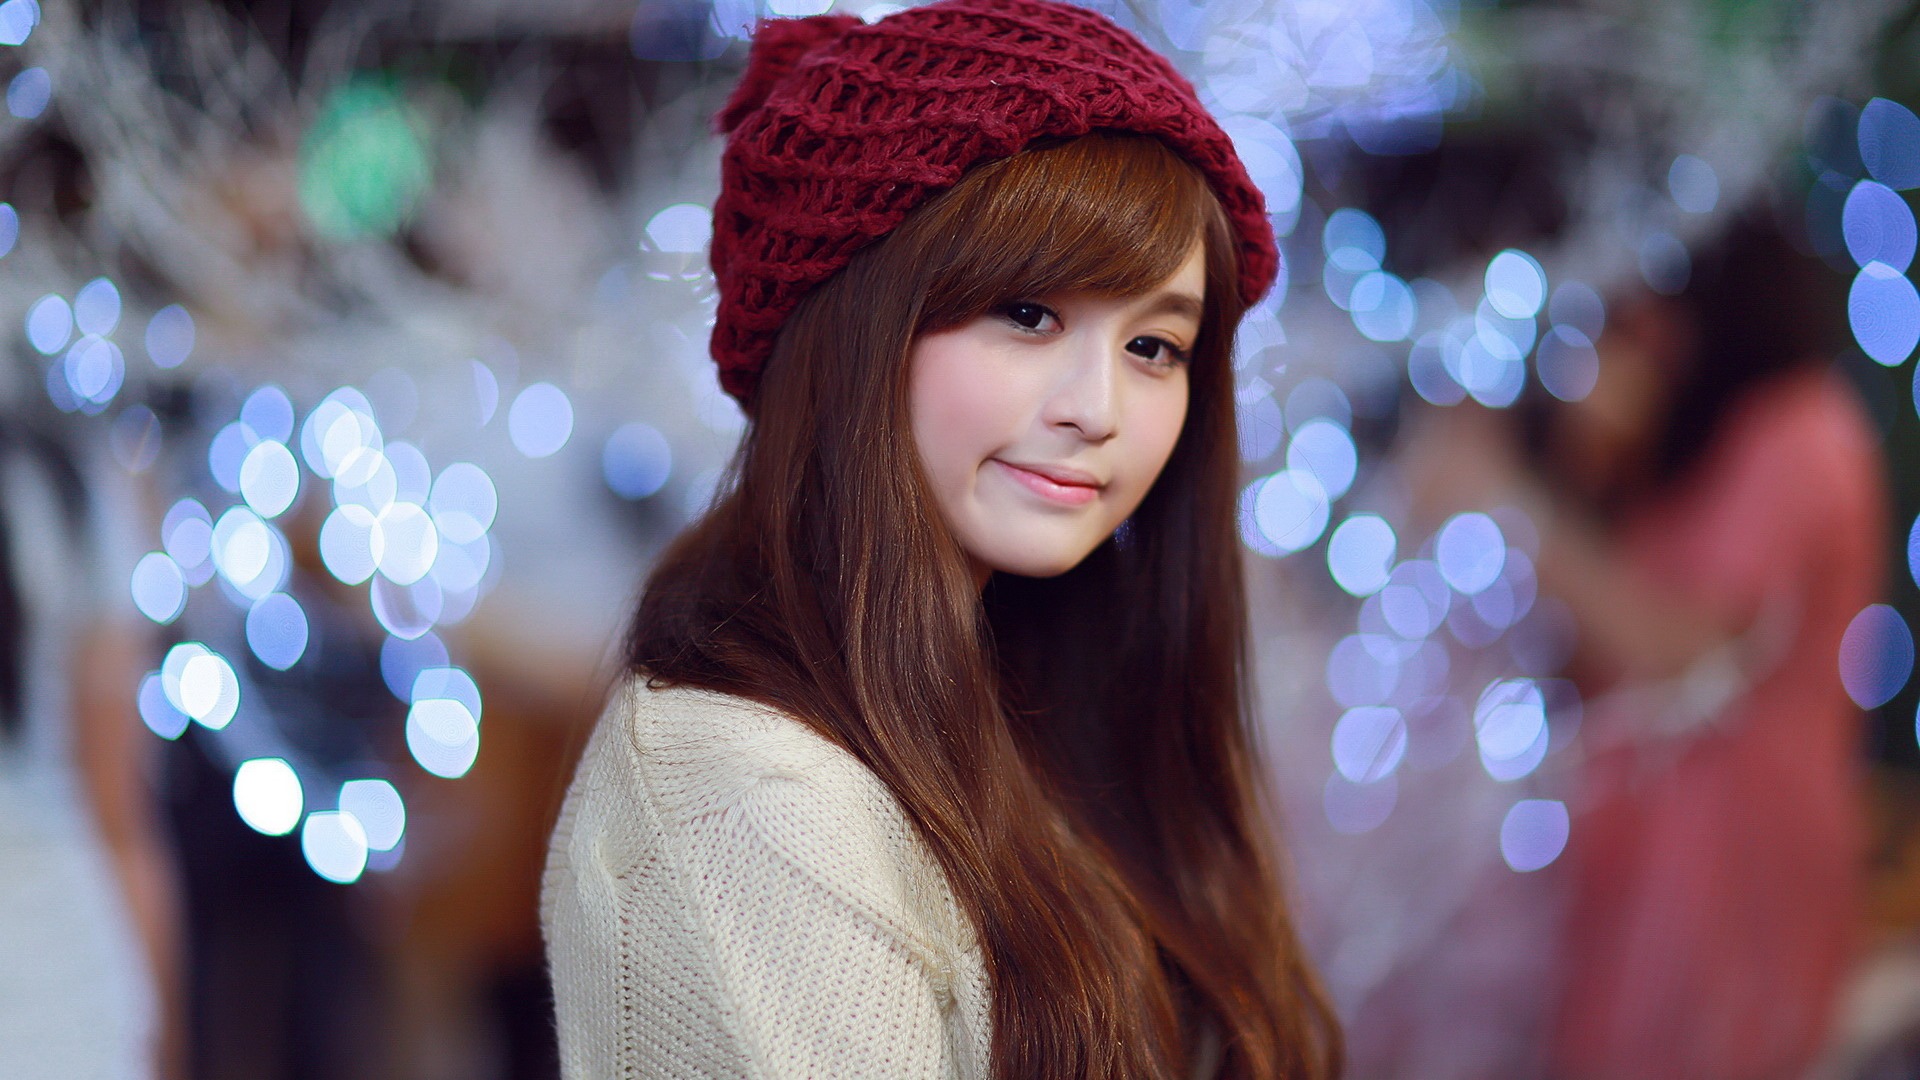 Pure and lovely young Asian girl HD wallpapers collection (3) #3 - 1920x1080